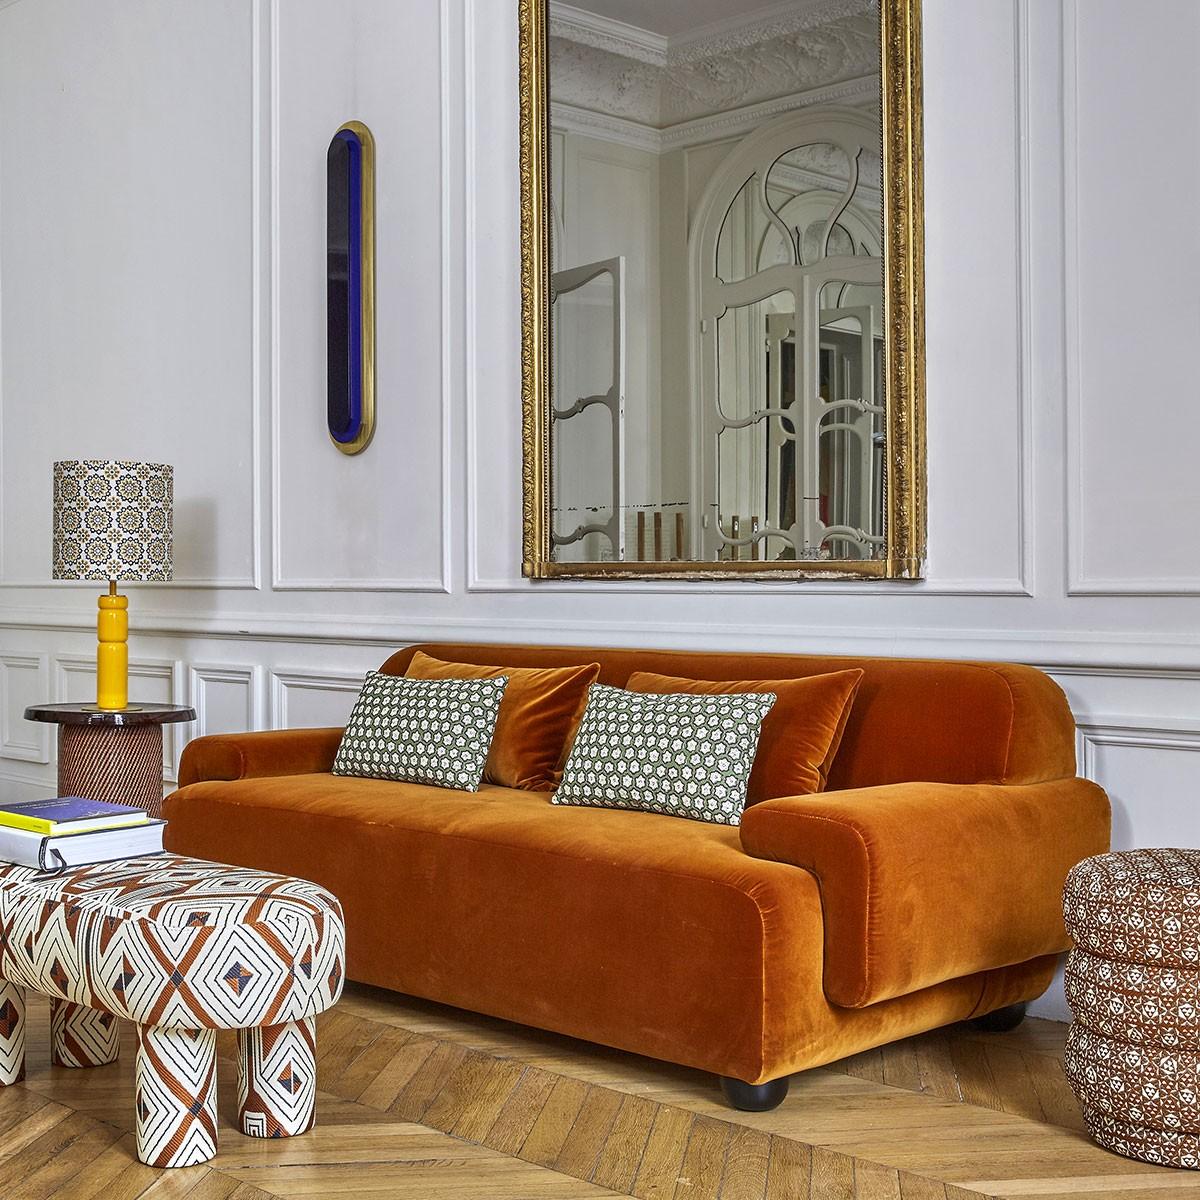 Popus Editions Lena 2.5 seater sofa in mouse megeve fabric with a knit effect

It looks like it's straight out of a movie, with its generous curves and wide armrests. It is a real invitation to spend long Sundays with the family, comfortably